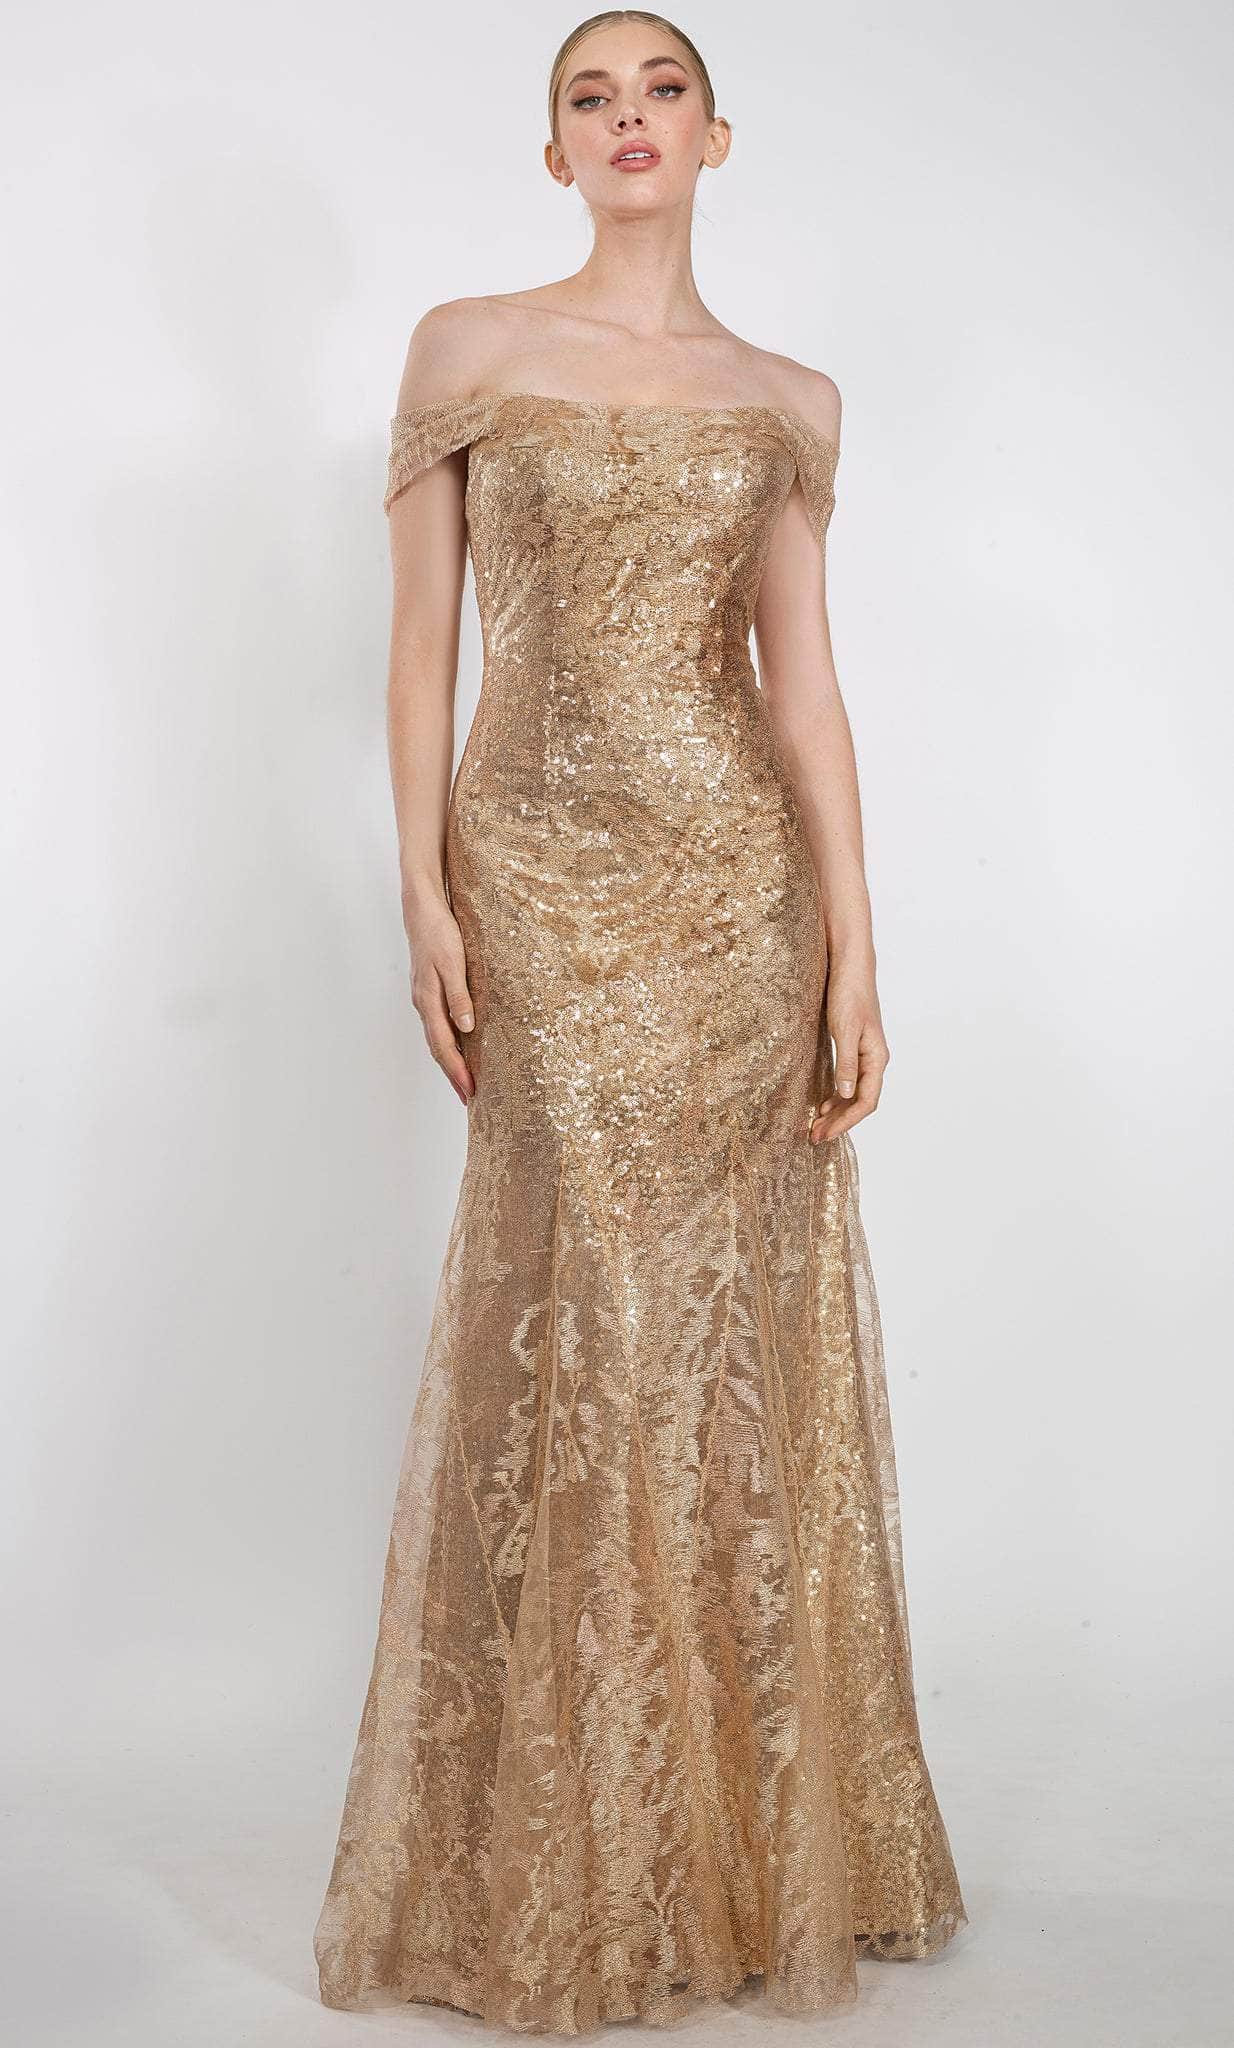 Image of Janique 92125 - Sequined Off Shoulder Evening Gown